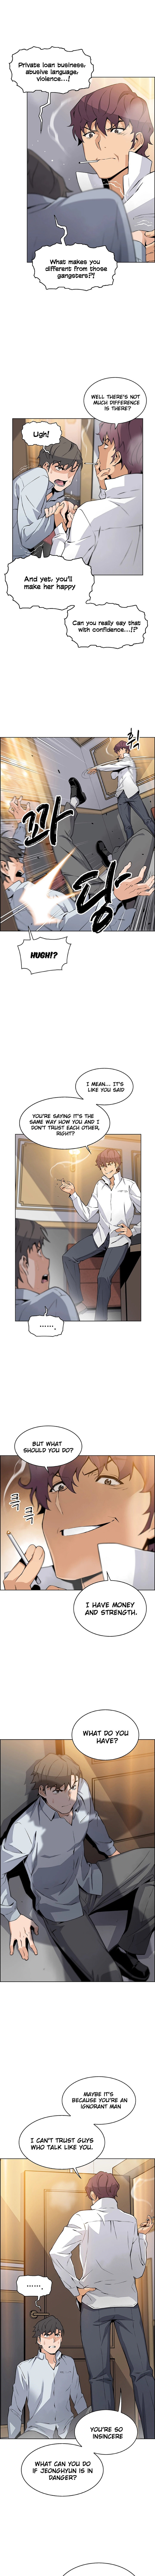 Housekeeper Manhwa - Chapter 46 Page 5